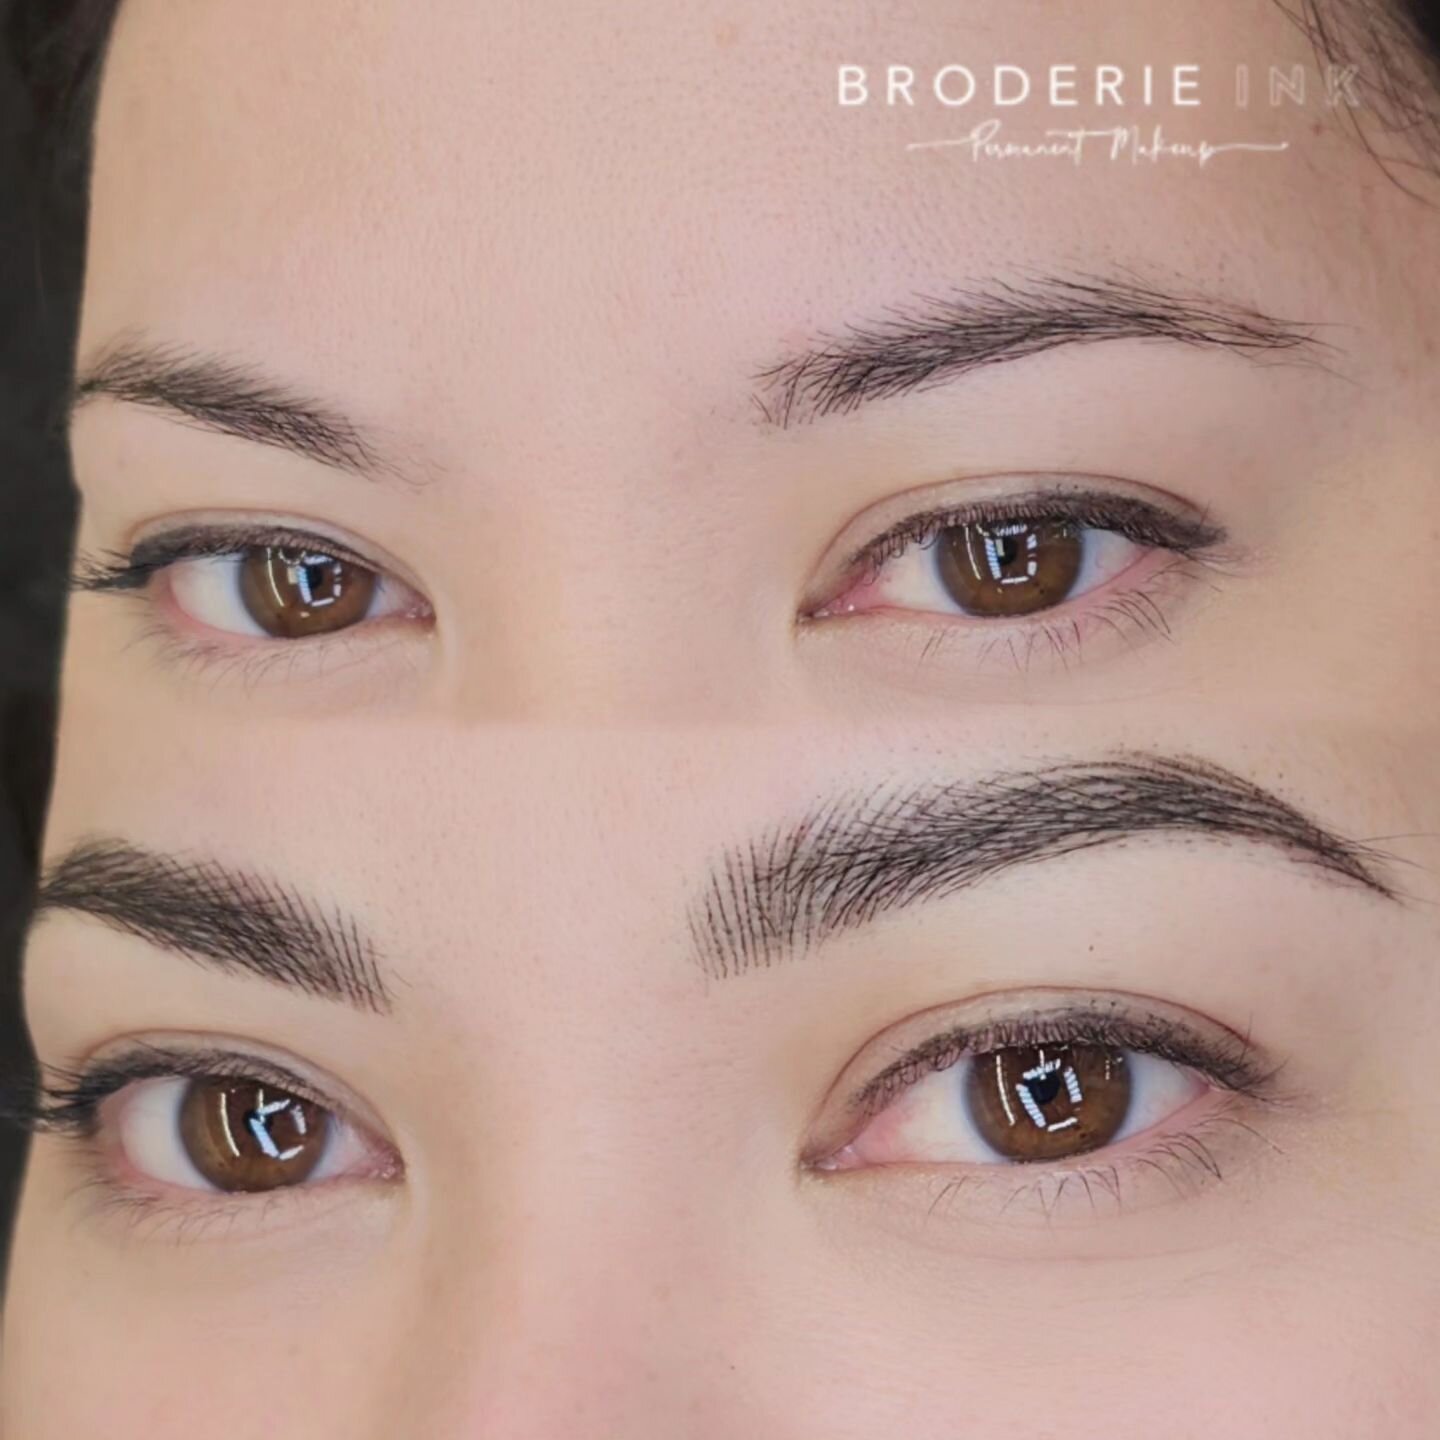 An eye-opening brow transformation

✨️ My client requested supernatural-looking 'no work done' eyebrows. I gave her shape a little volume and lift and filled in the patchiness with thin and feathery nanostrokes.

----‐--------------------------------